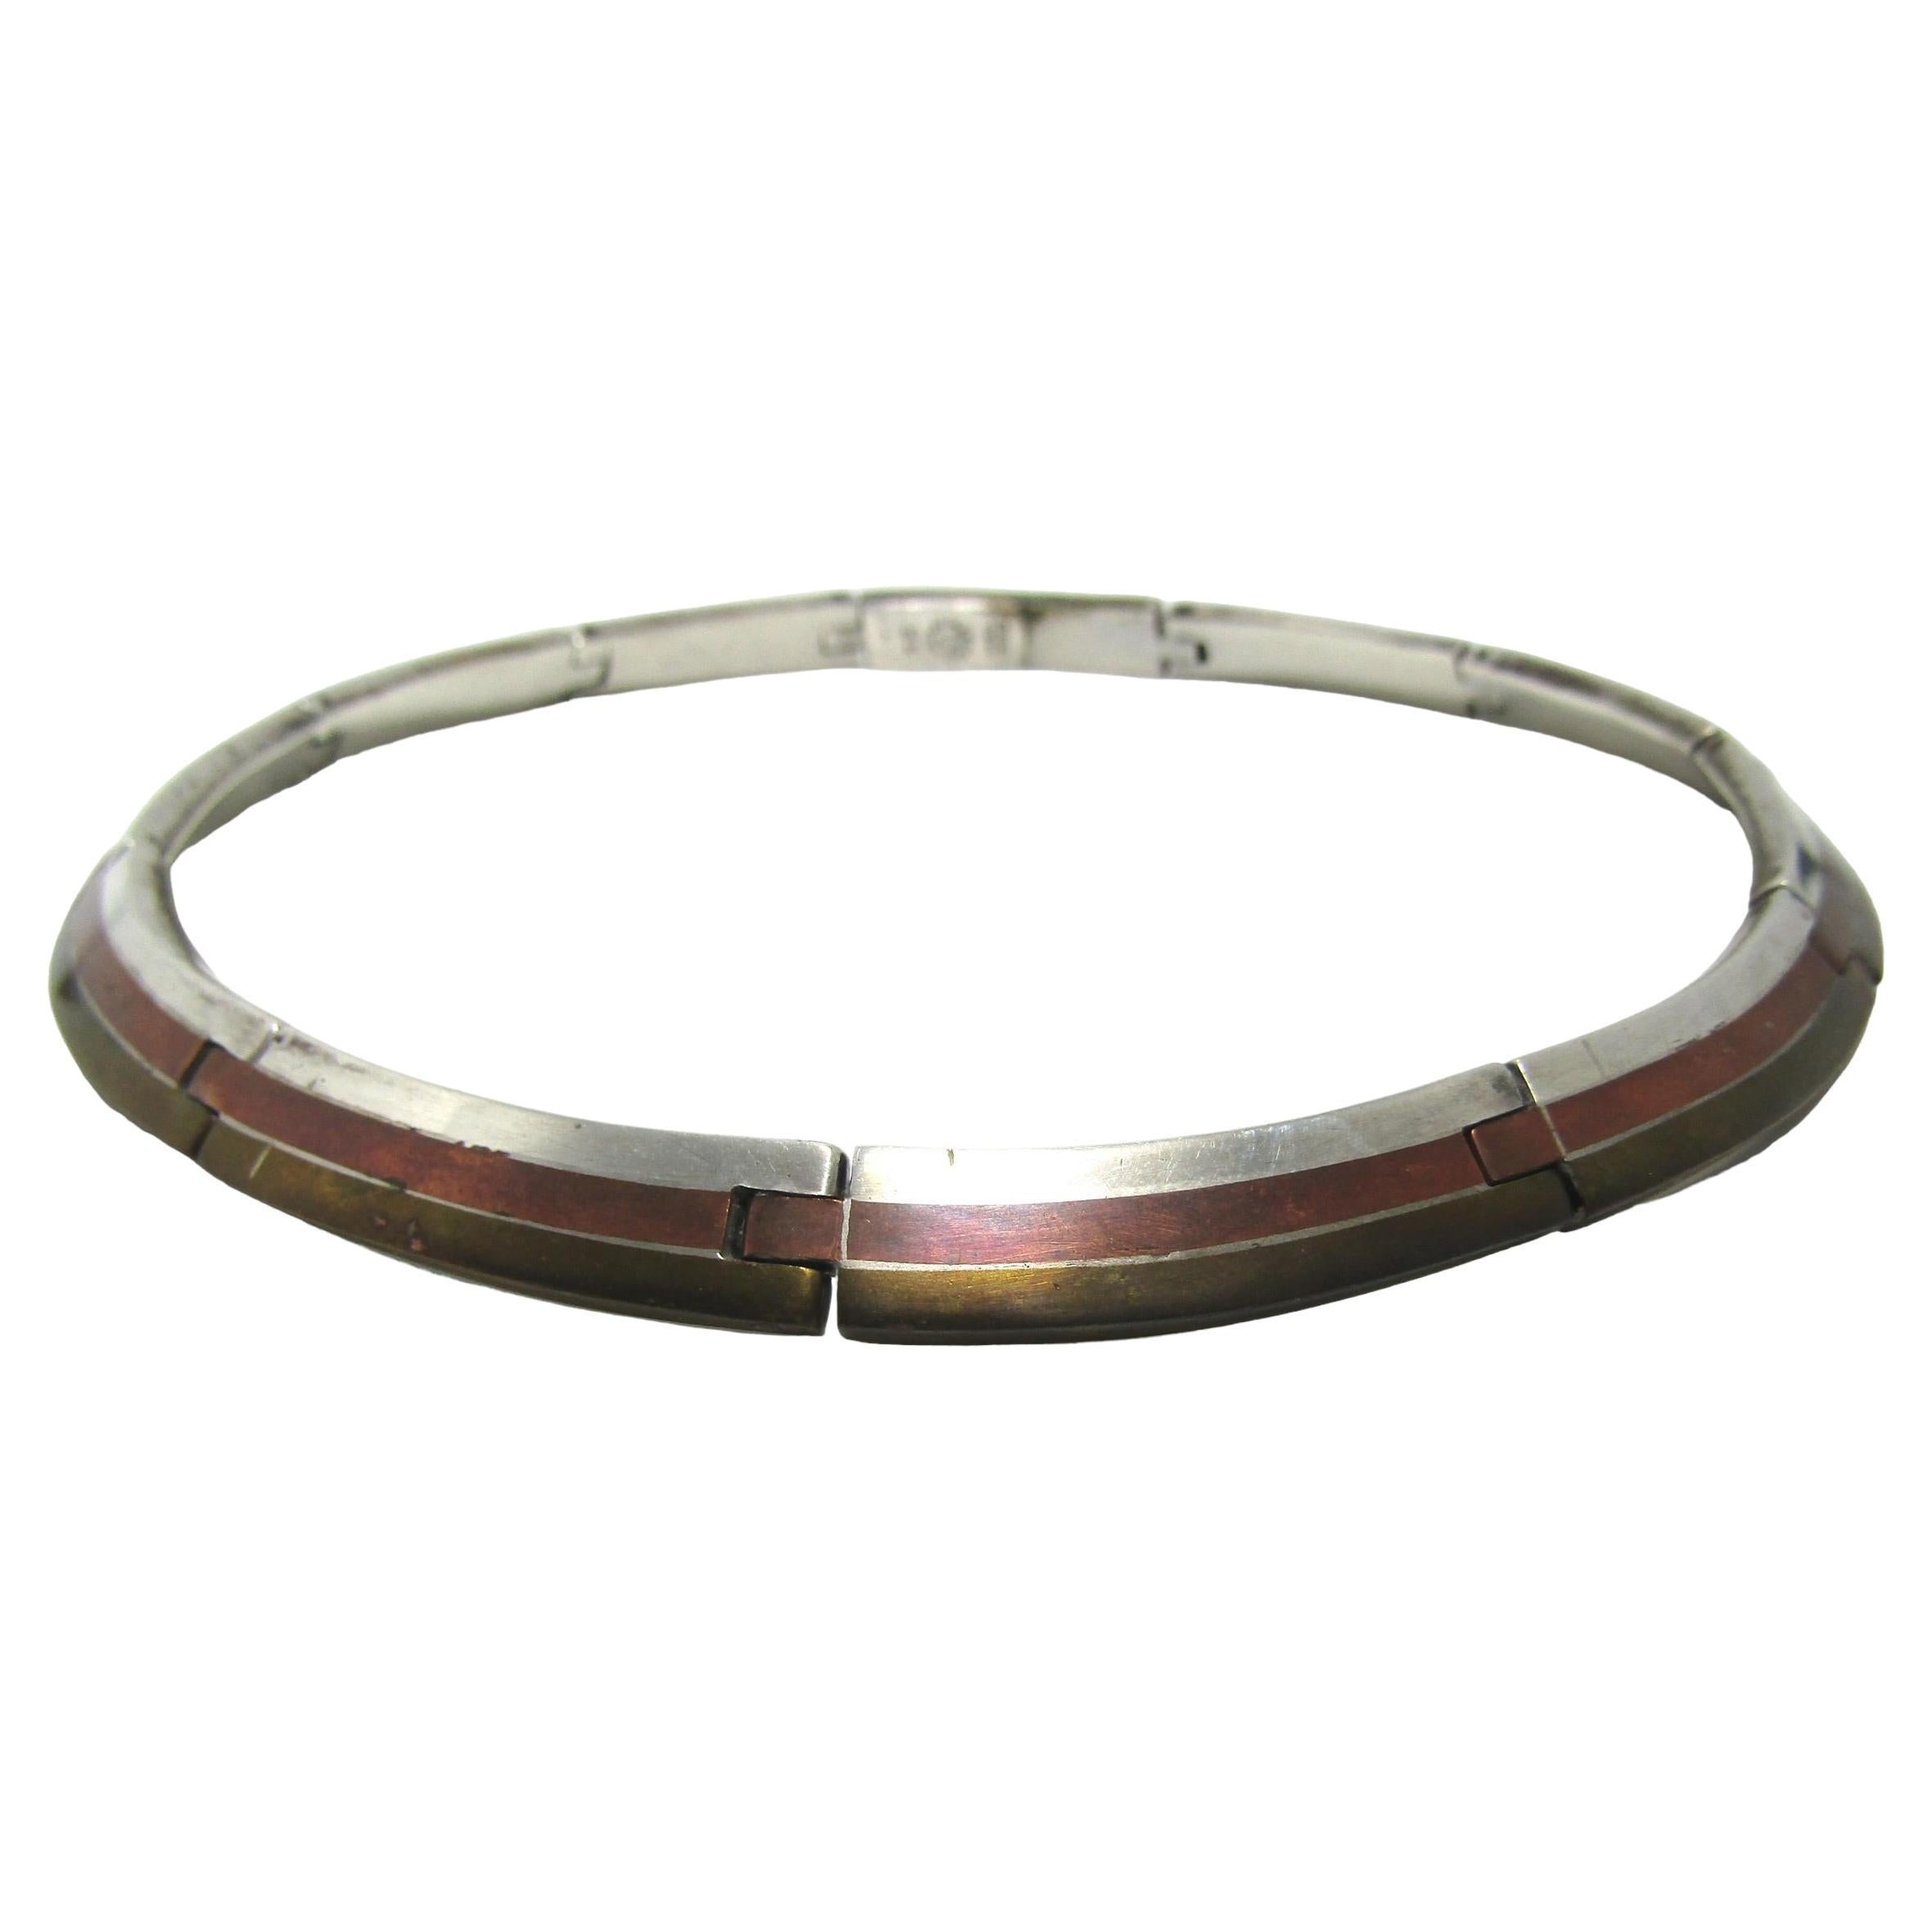 This unique mid-century modern choker necklace was made by Los Castillo of Taxco, Mexico. It boasts sterling silver with an inlay of brass and copper. The weight is a heavy 102g and the length is 16